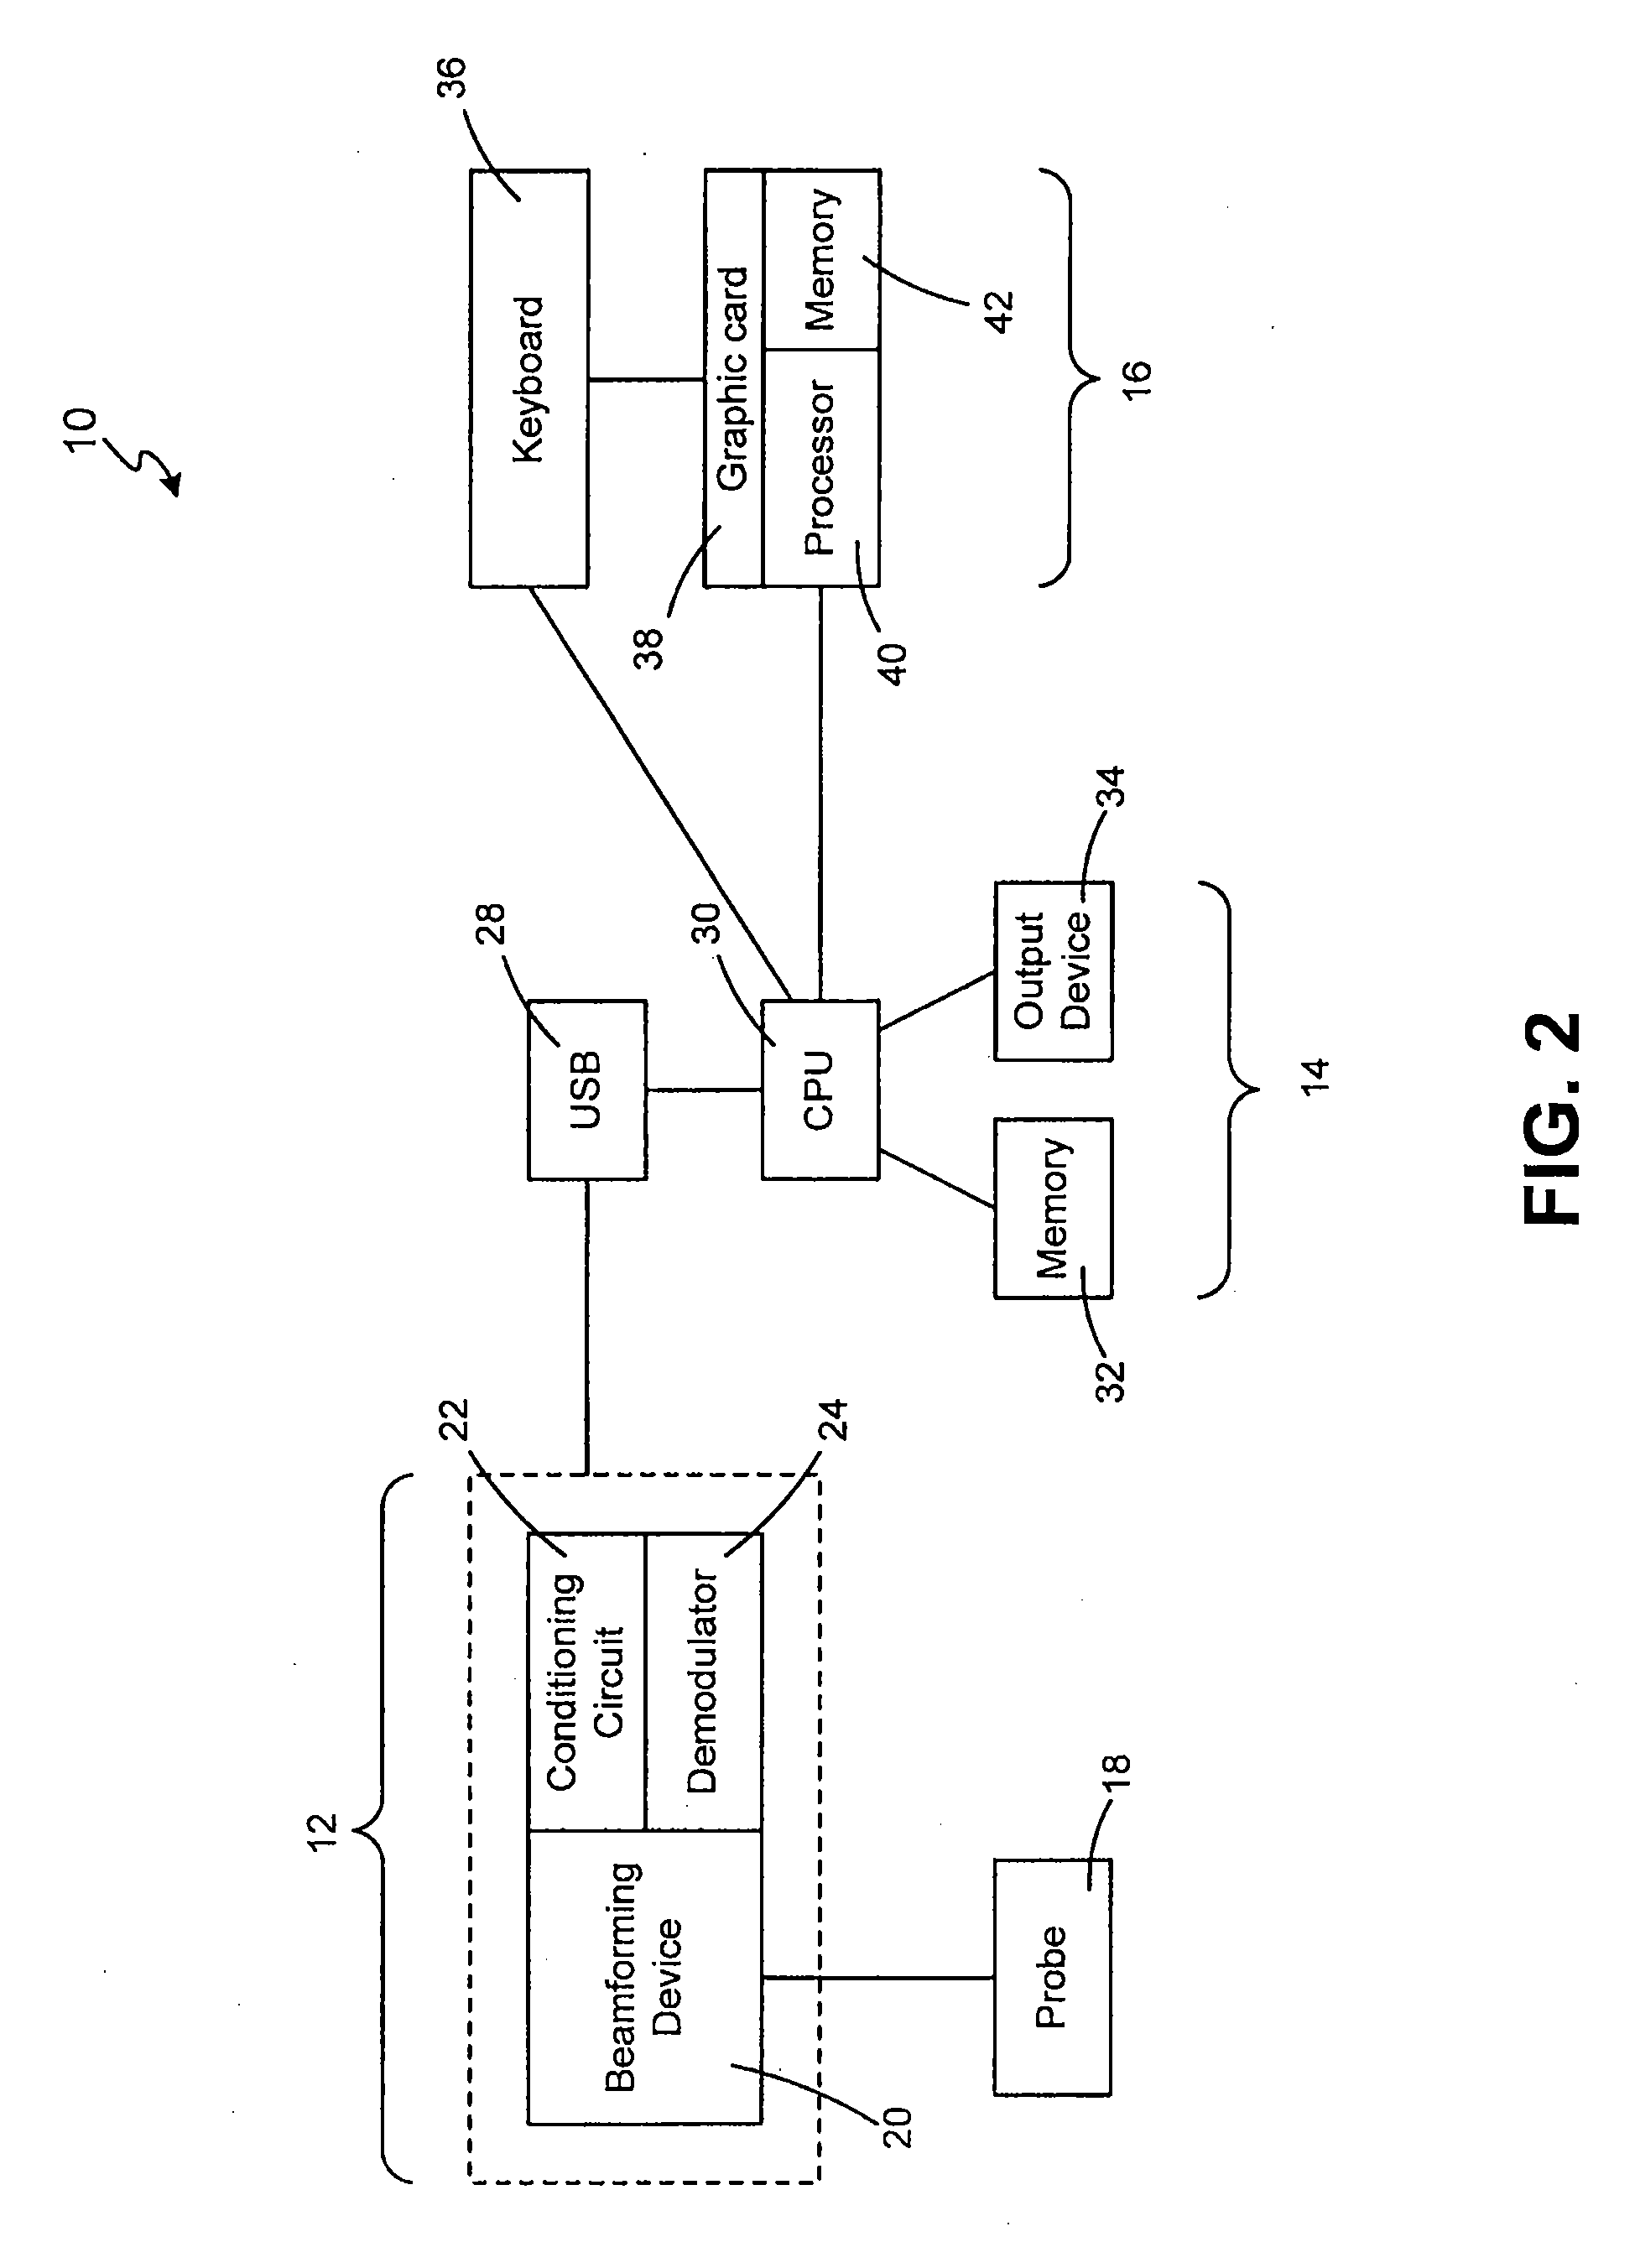 Ultrasound system and method for imaging and/or measuring displacement of moving tissue and fluid